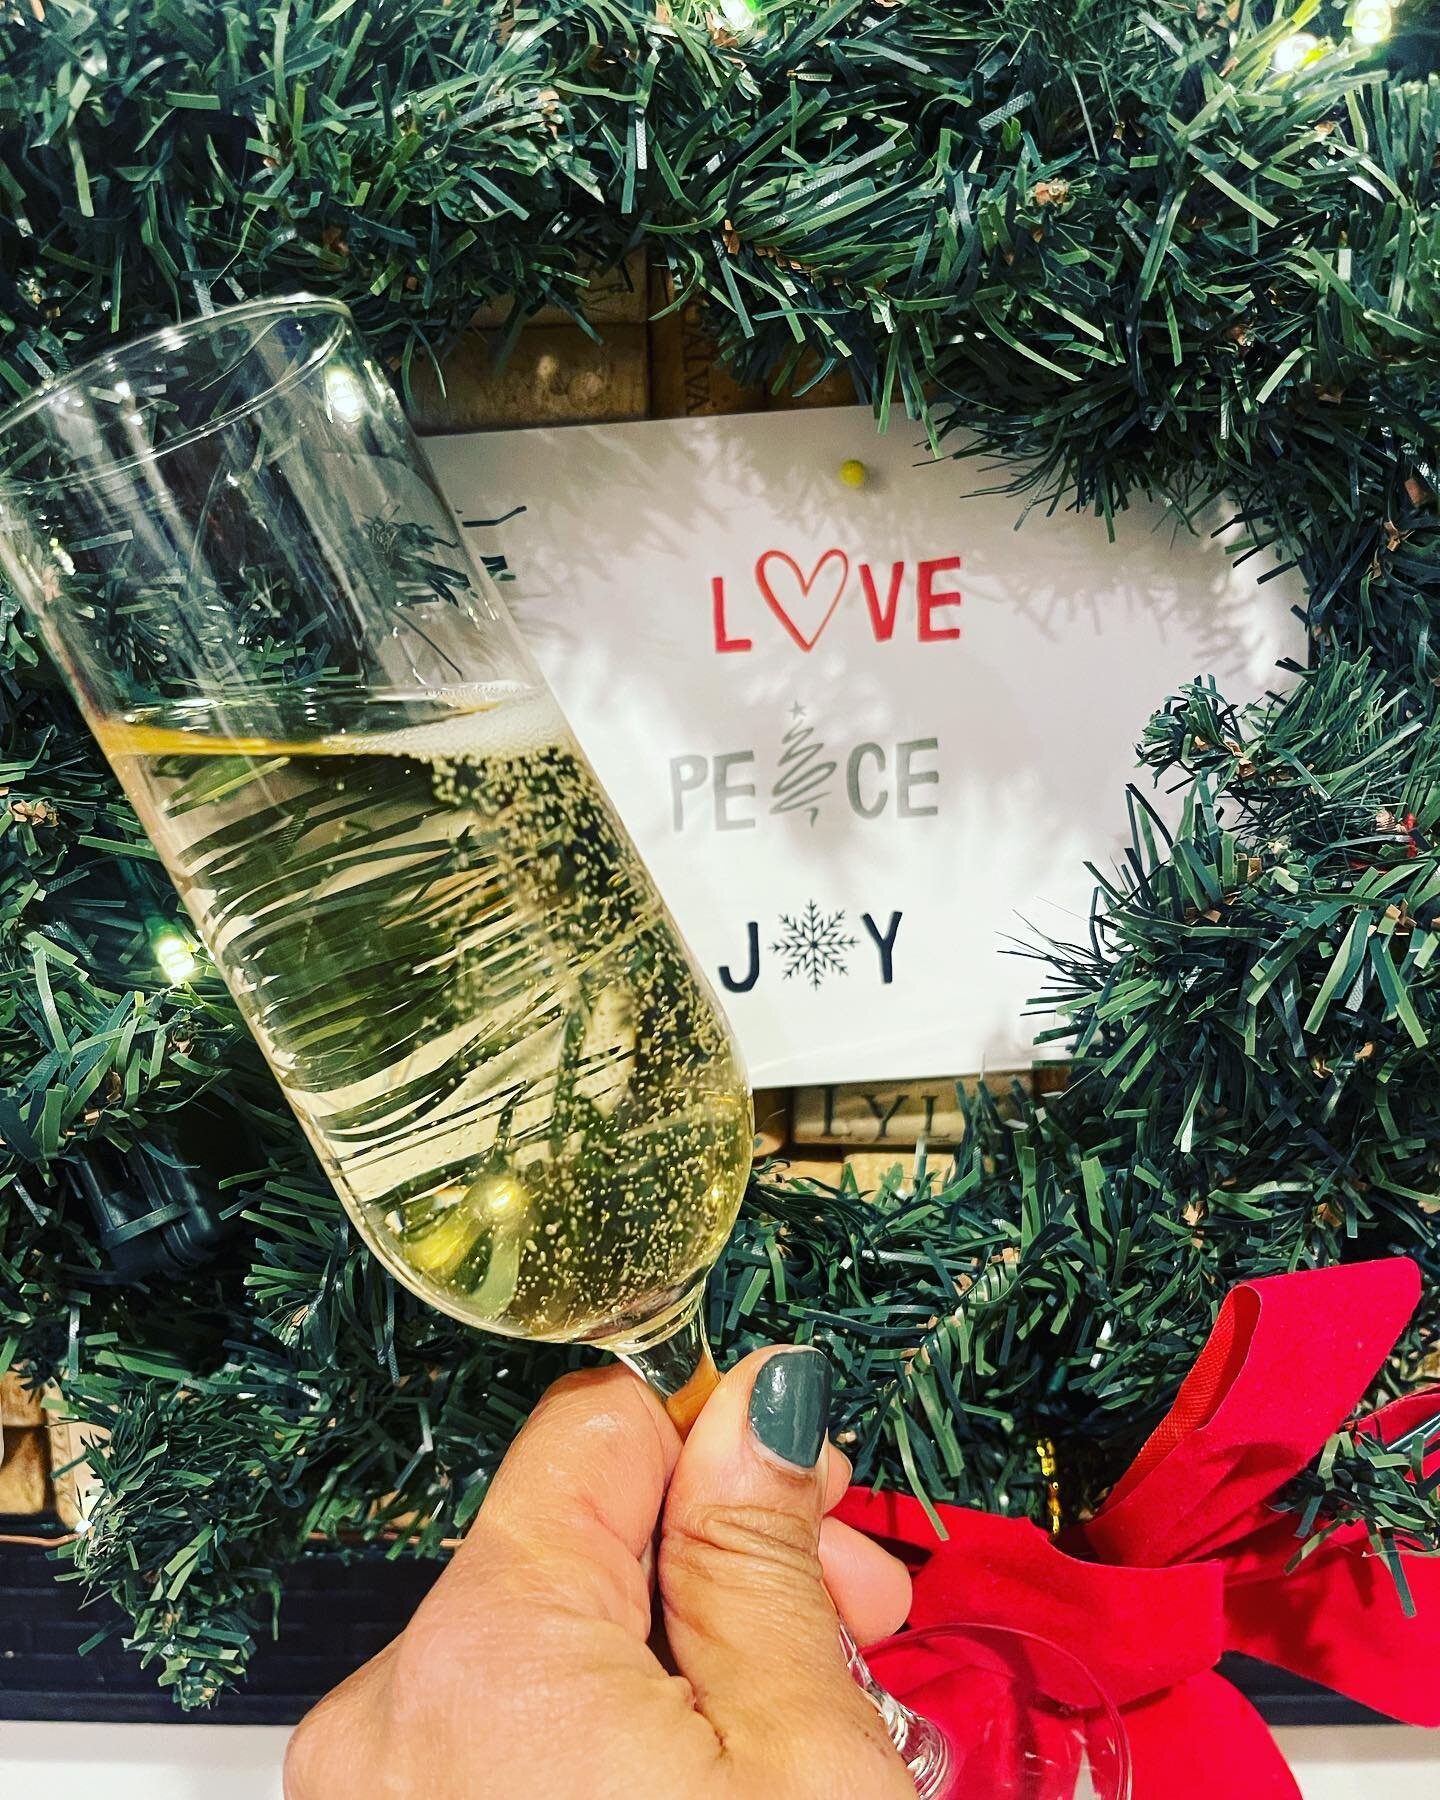 The chore of &ldquo;undecorating&rdquo; requires Champagne&hellip;. Happy Epiphany Sunday&hellip; 

May the JOY, LOVE, and PEACE of the holidays last for a few more weeks&hellip;. 🍾🎉

And cheers to everyone else who is taking down all that holiday 